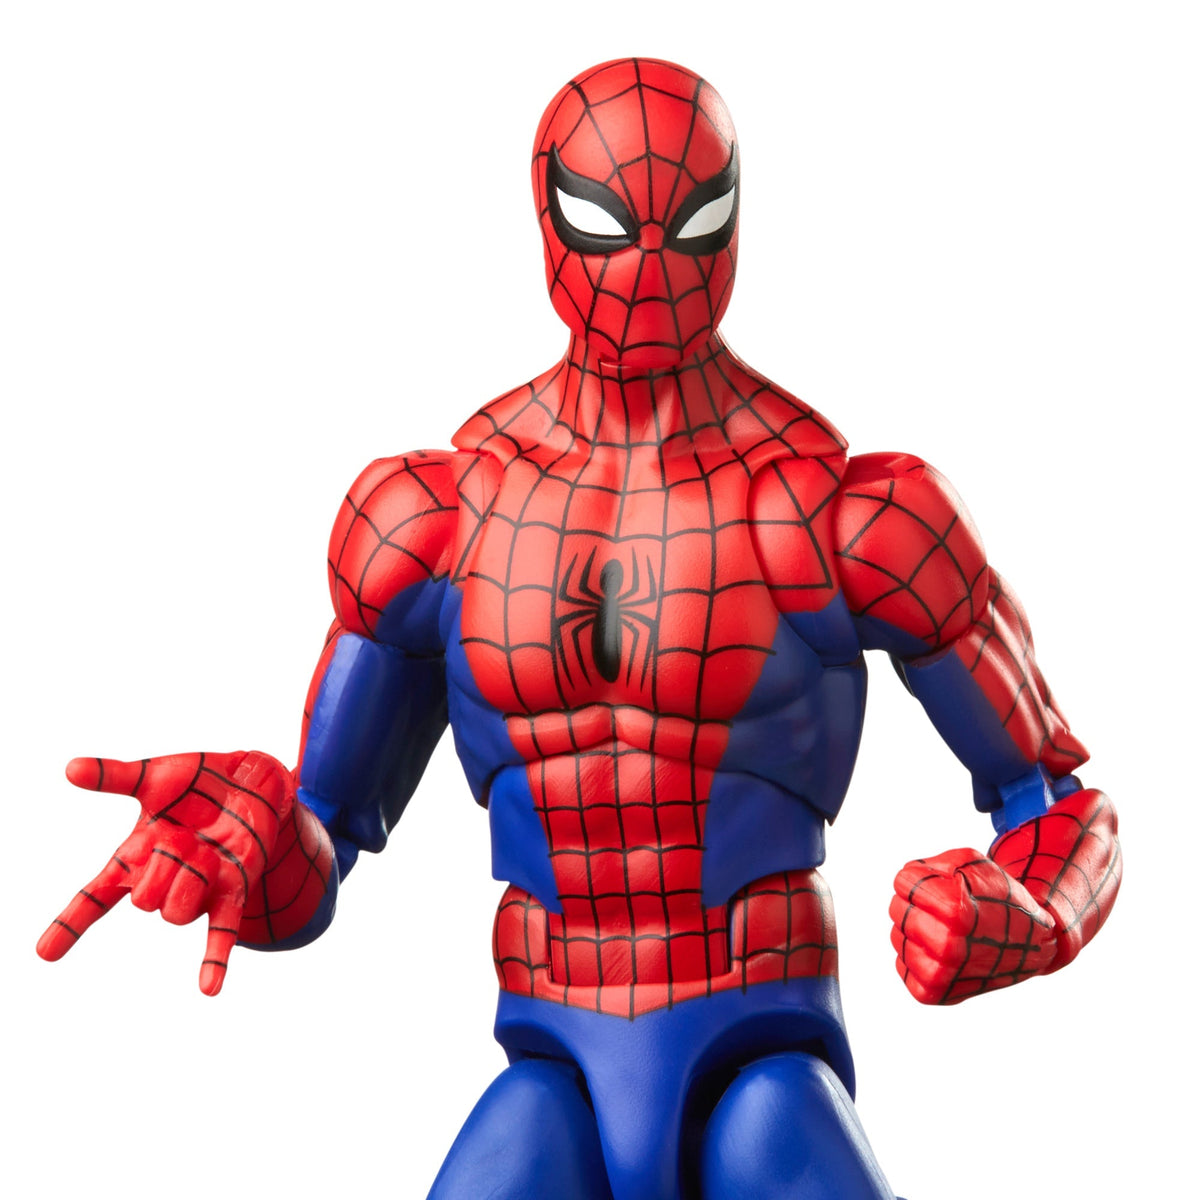 Spider-Man and His Amazing Friends Marvel Legends Exclusive